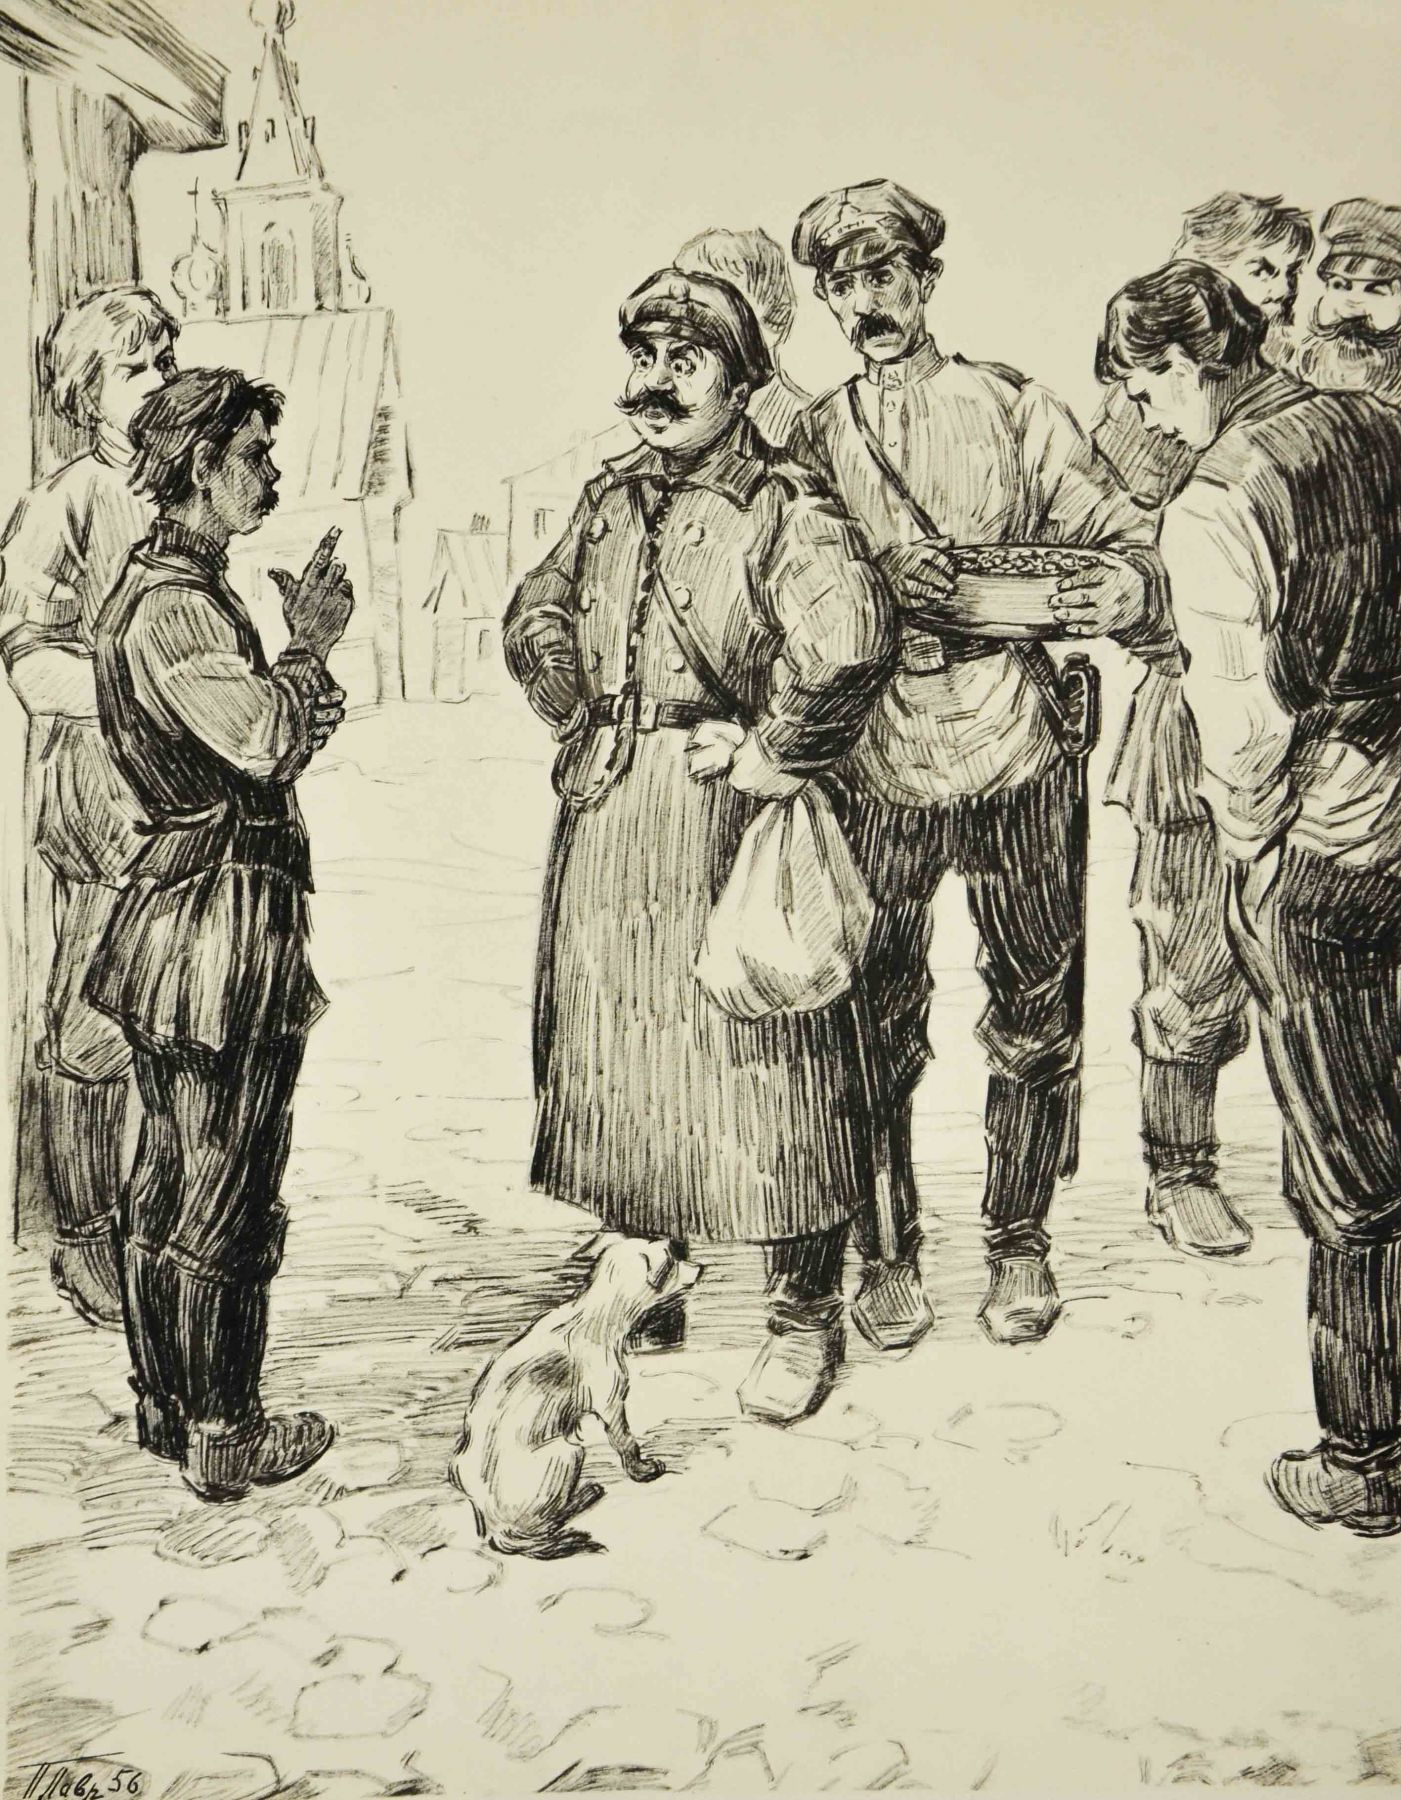  Illustration for the story 